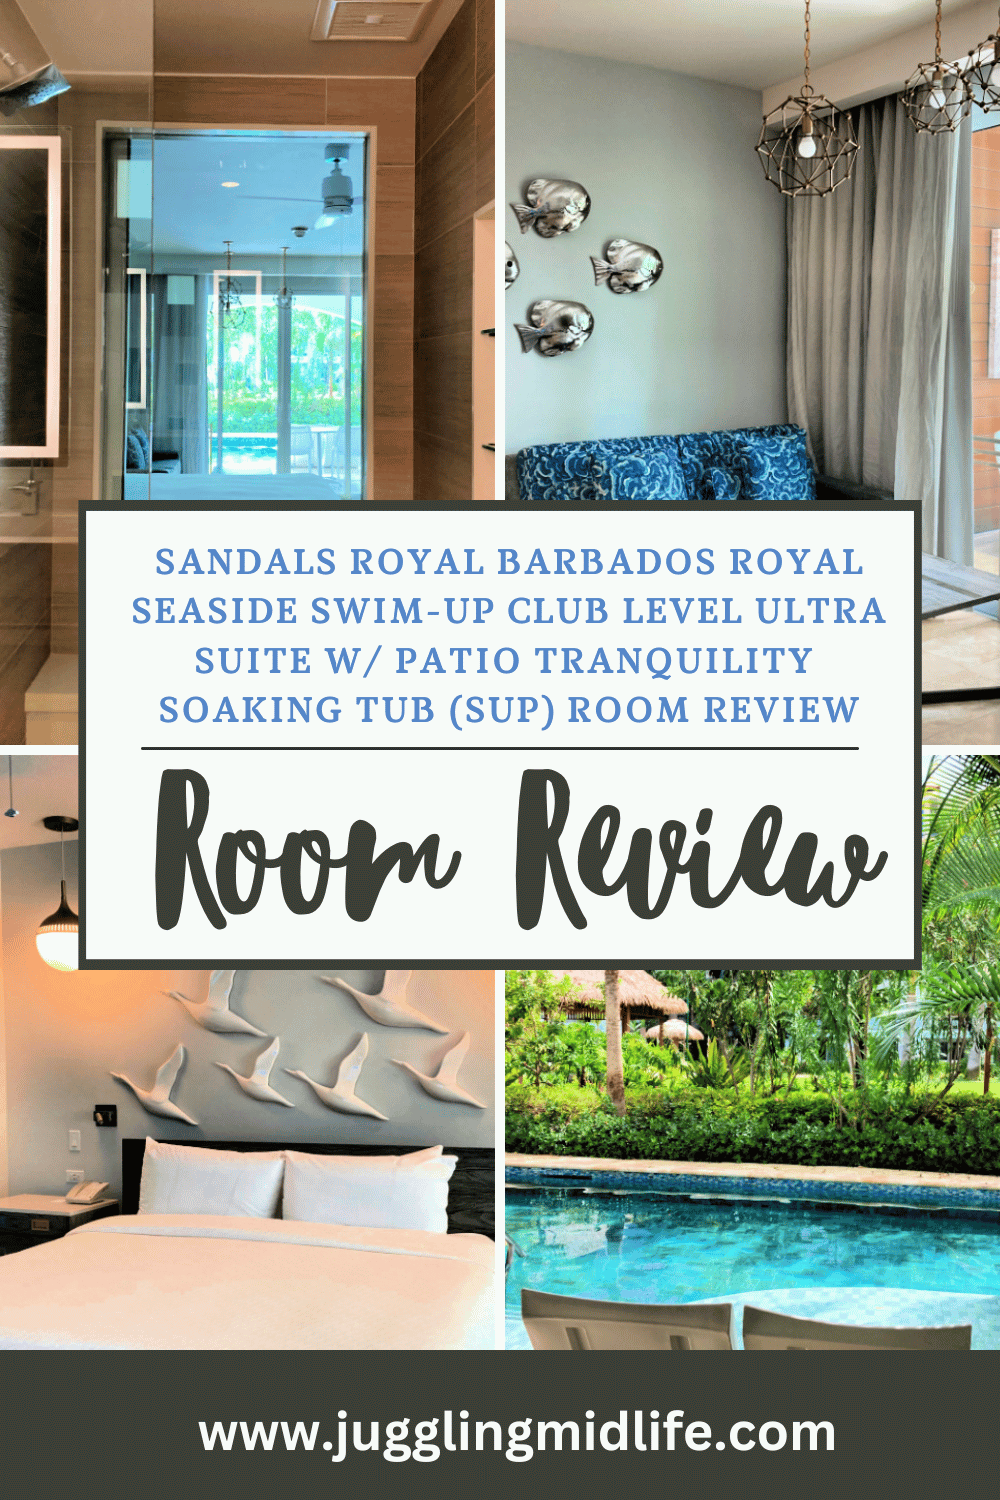 Sandals Royal Barbados Seaside Swim-Up Club Level Ultra Suite with Patio Tranquility Soaking Tub (SUP) Room Review